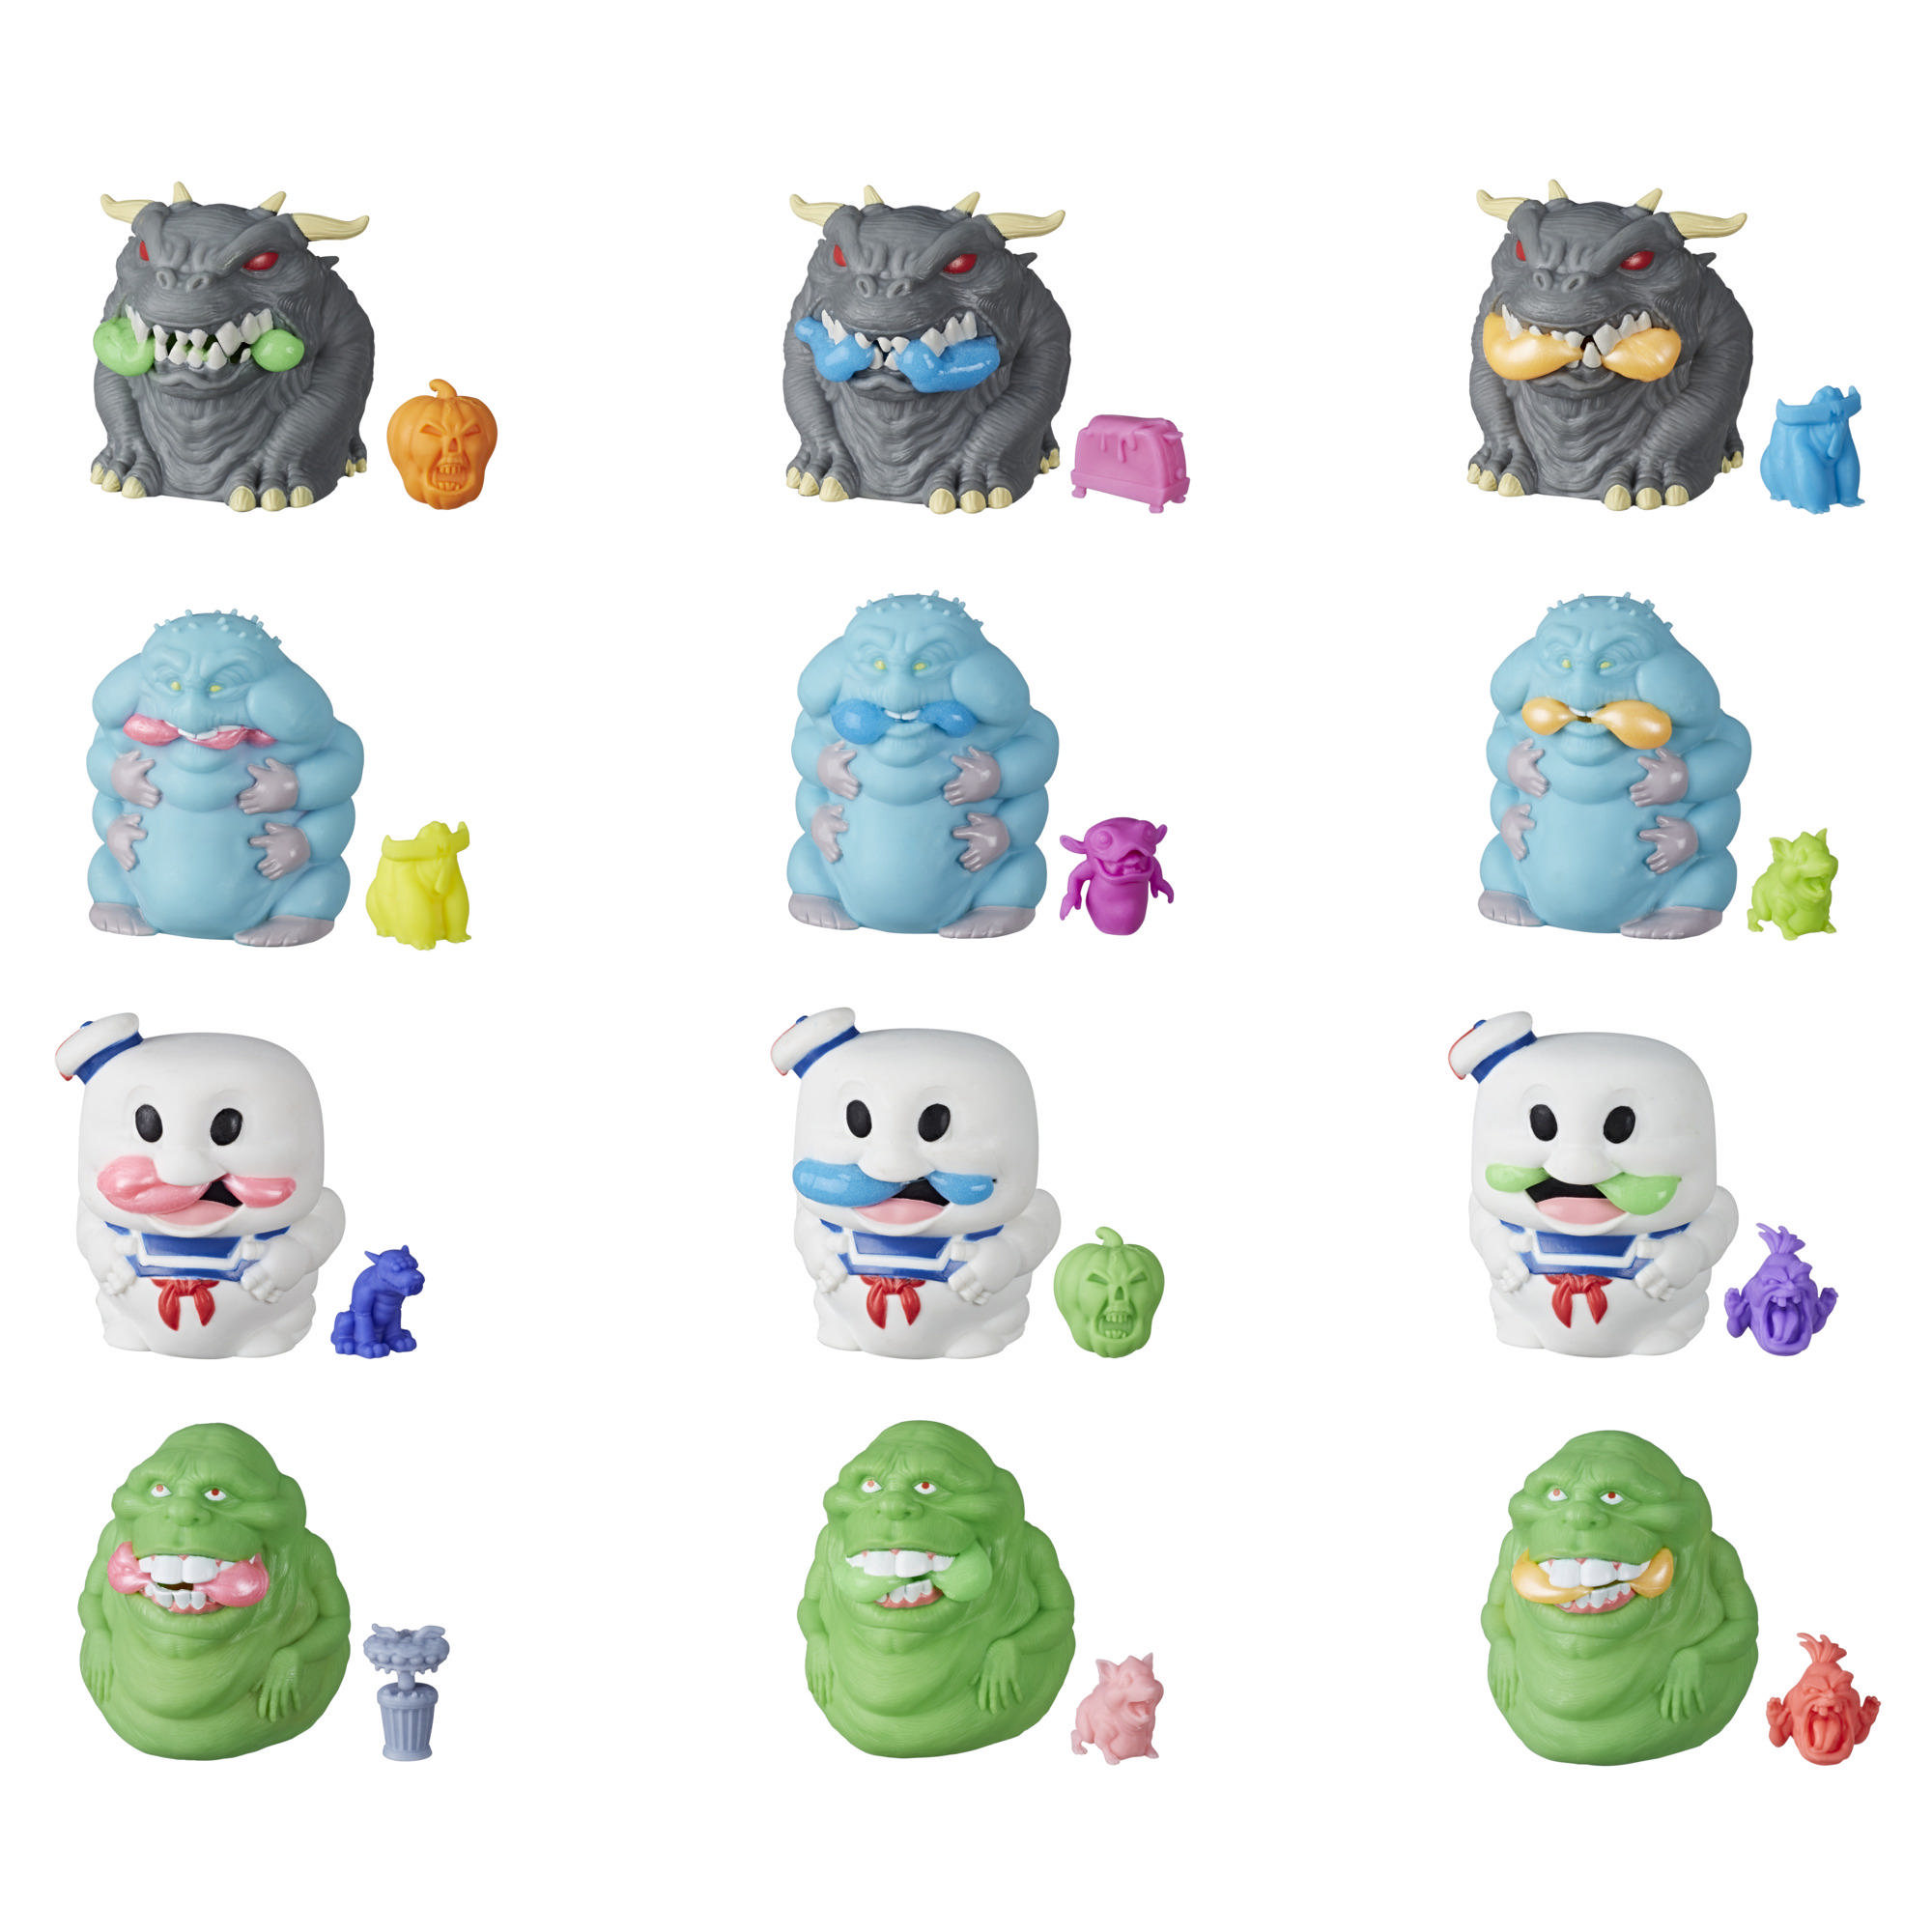 Ghostbusters Ecto-Plasm Ghost Gushers Squeezable Figures with Ecto-Plasm and Mystery Mini Figures Inside